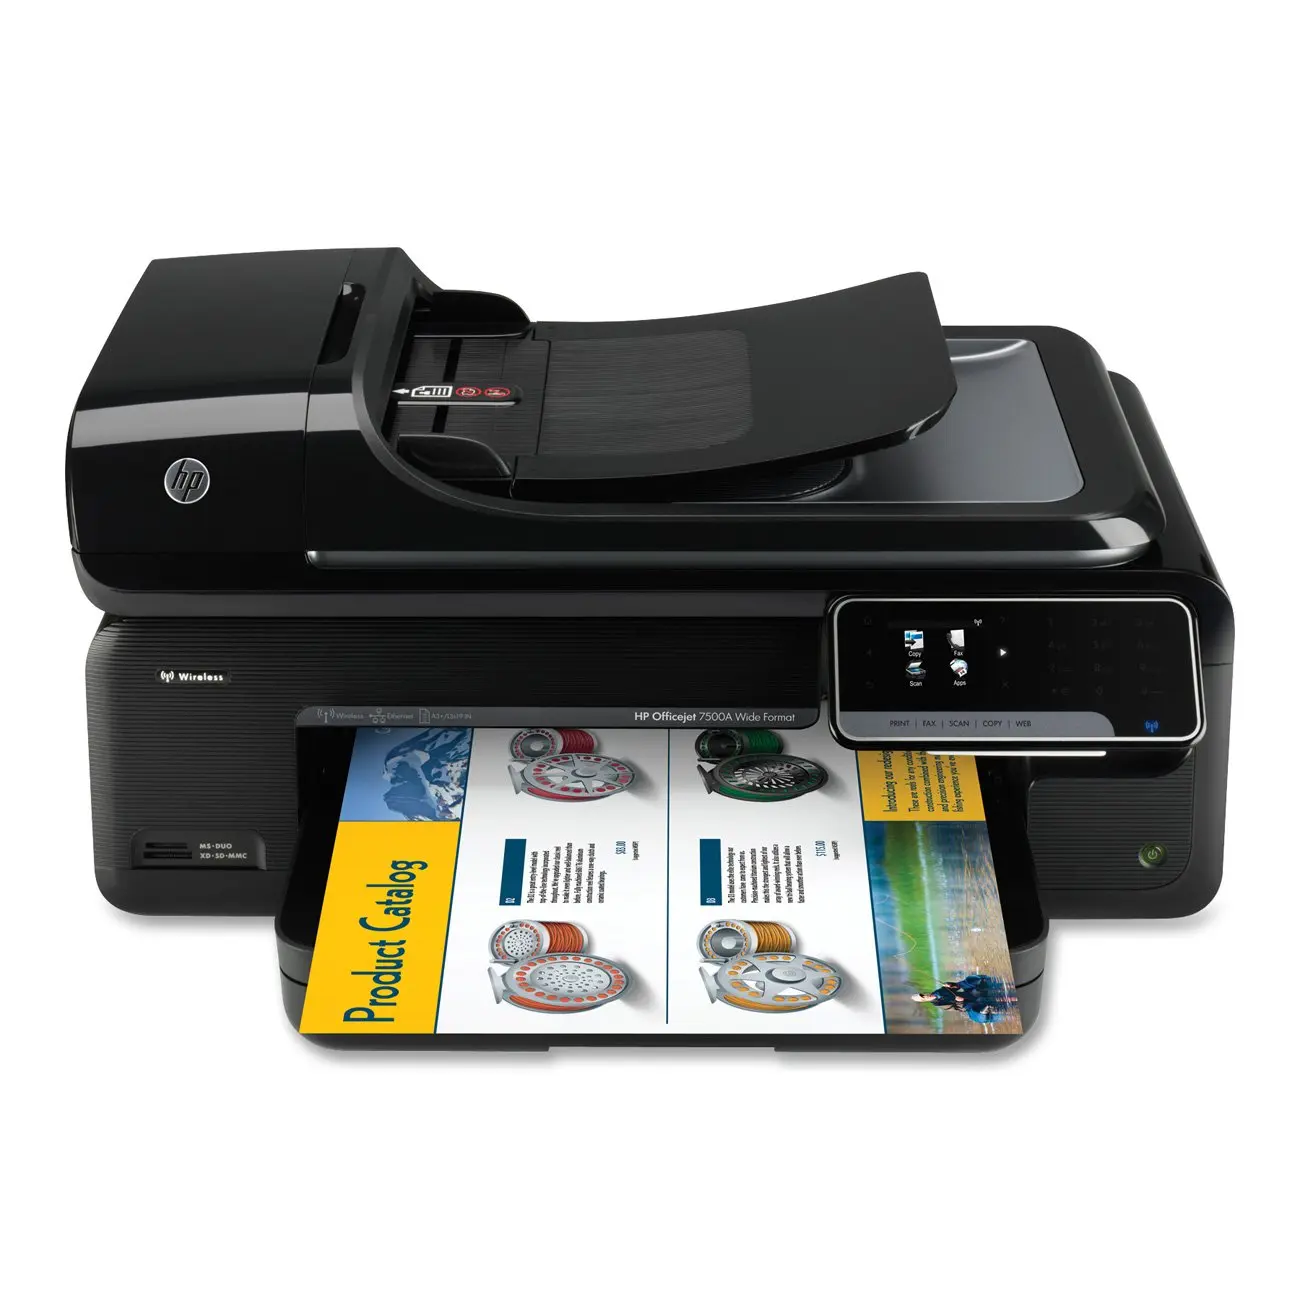 Hp officejet 7500a a3 printer: professional-quality business printing